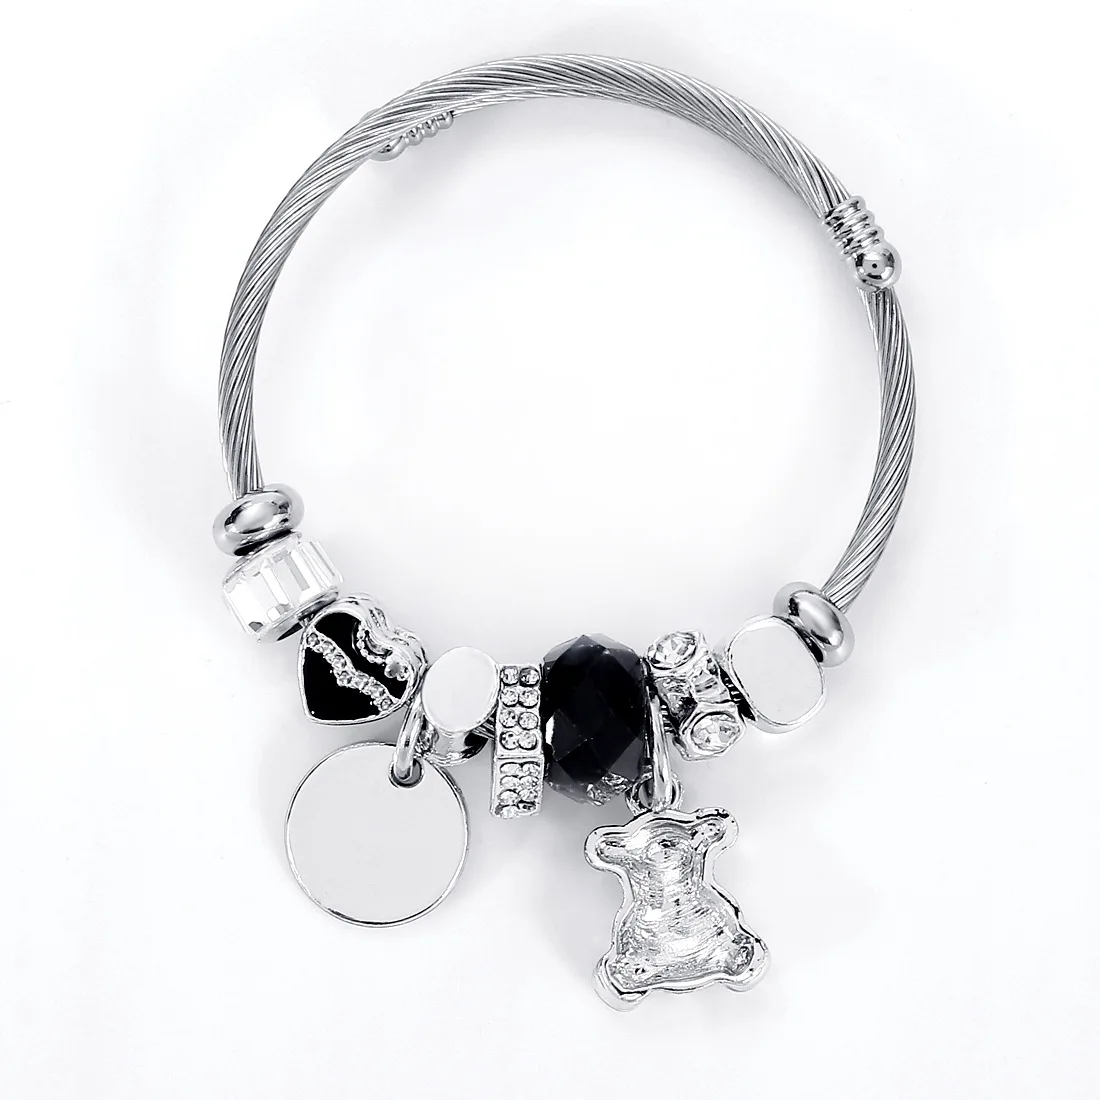 Romantic Bear Charm Bracelet With Client's Own Logo Engraved Stainless Steel Jewelry Hot Selling Lady Fashion Cuff Bracelet